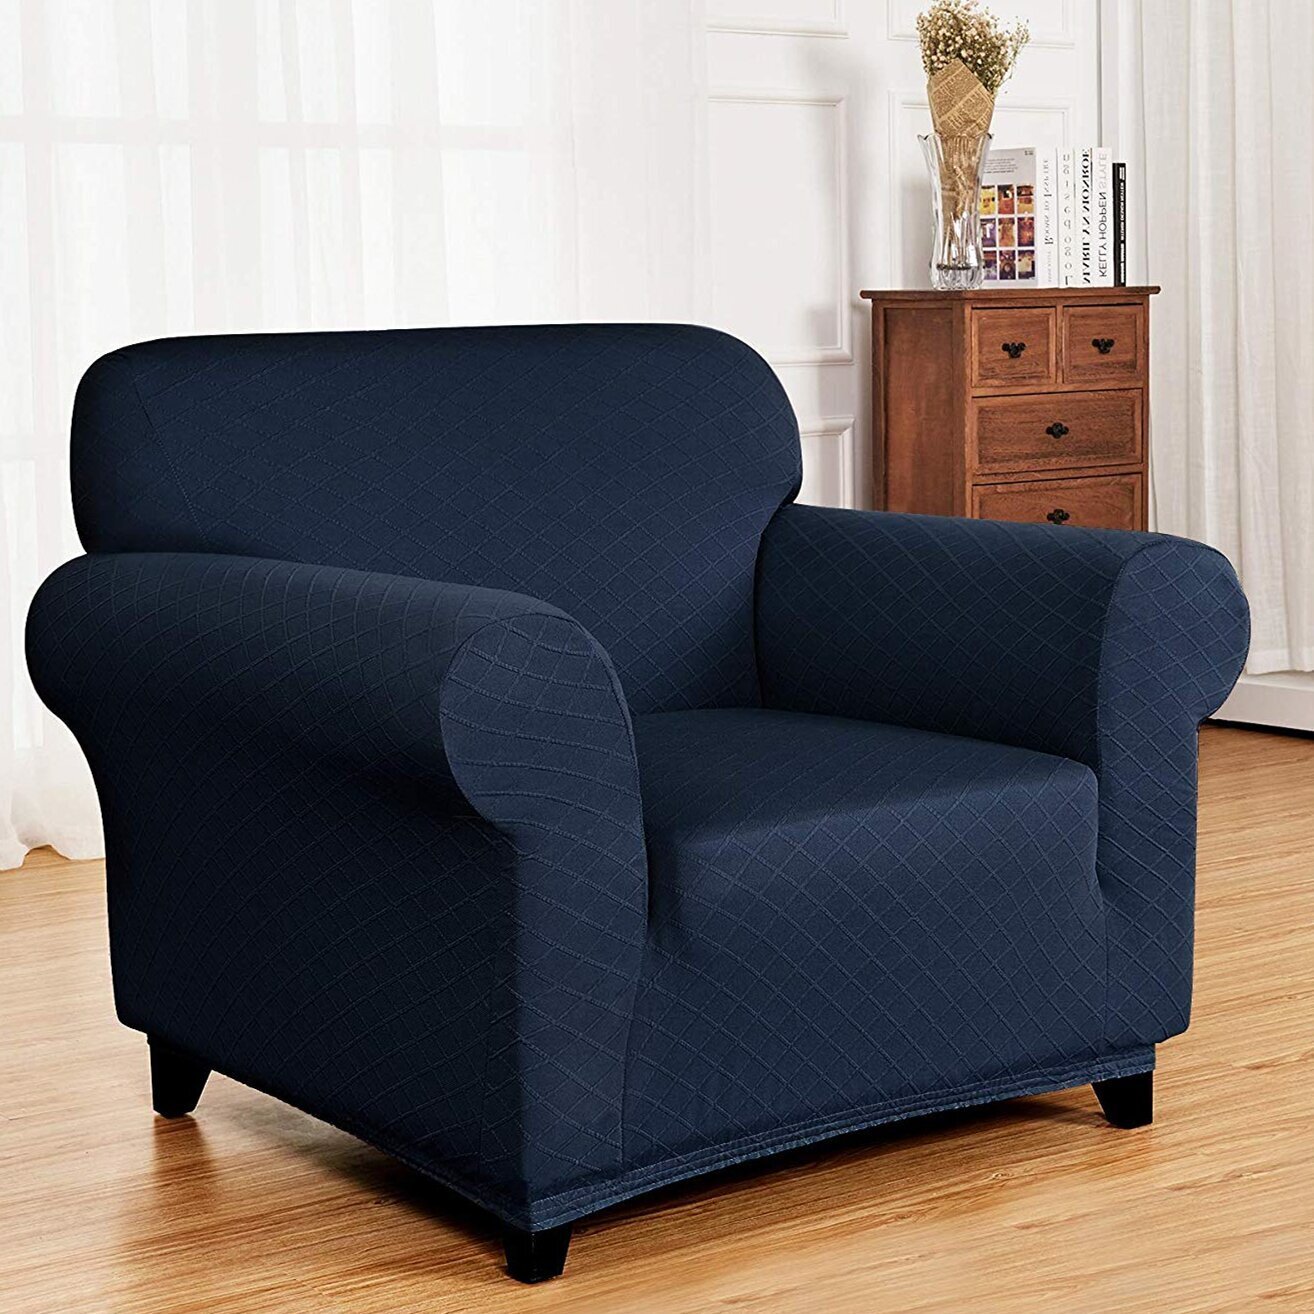 Universal Fit Club Chair Slipcover